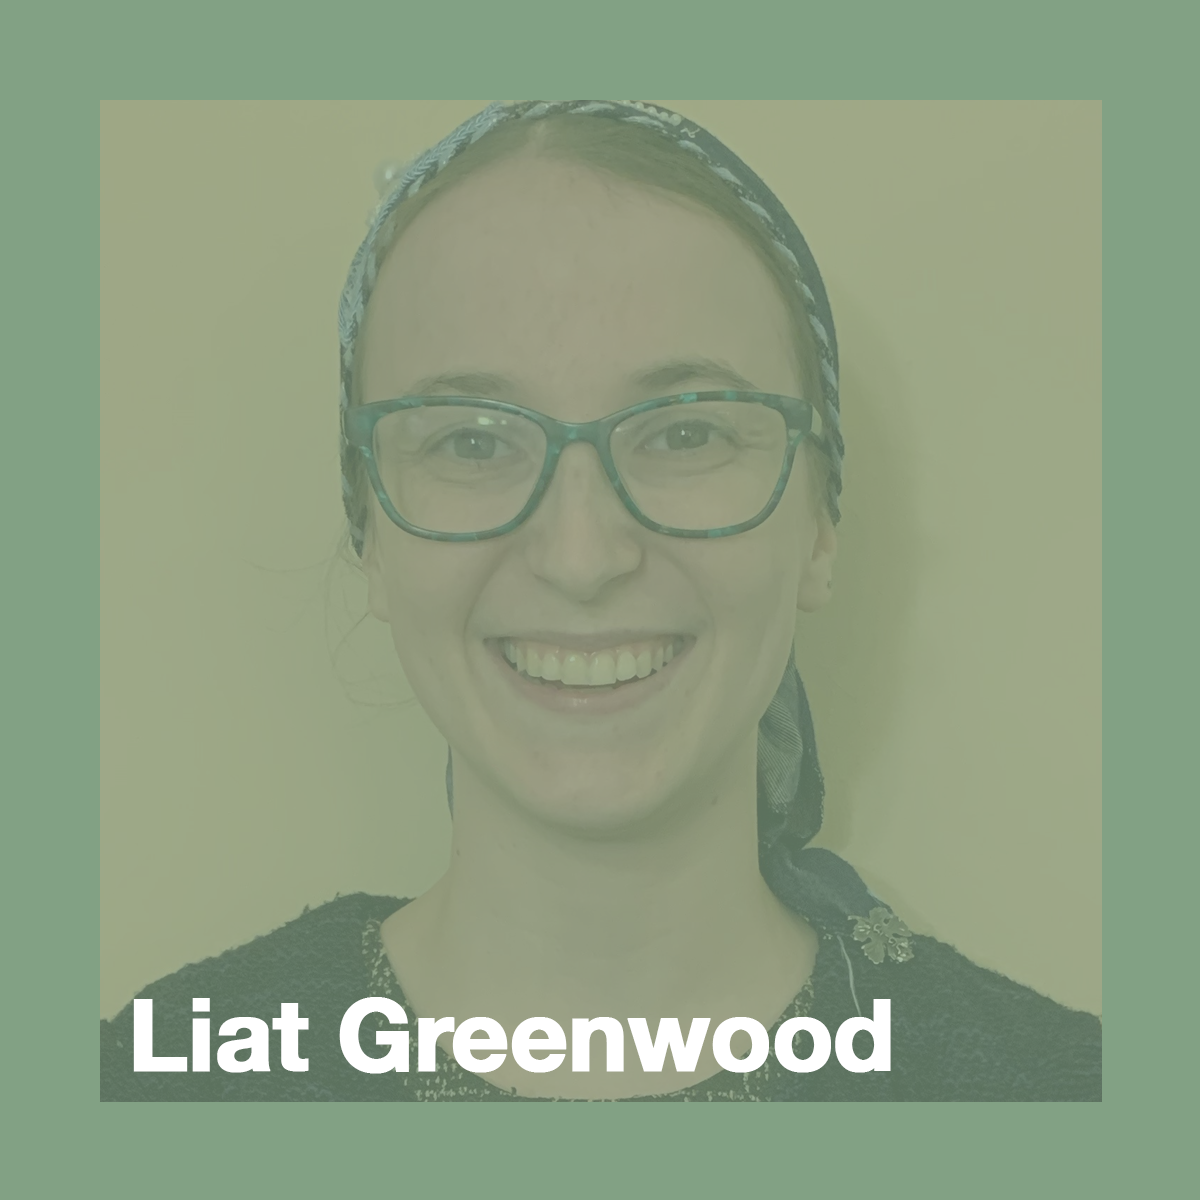 Liat Greenwood, Nursing Scholar. Liat is wearing green glasses and a blue headband and smiling at the camera.